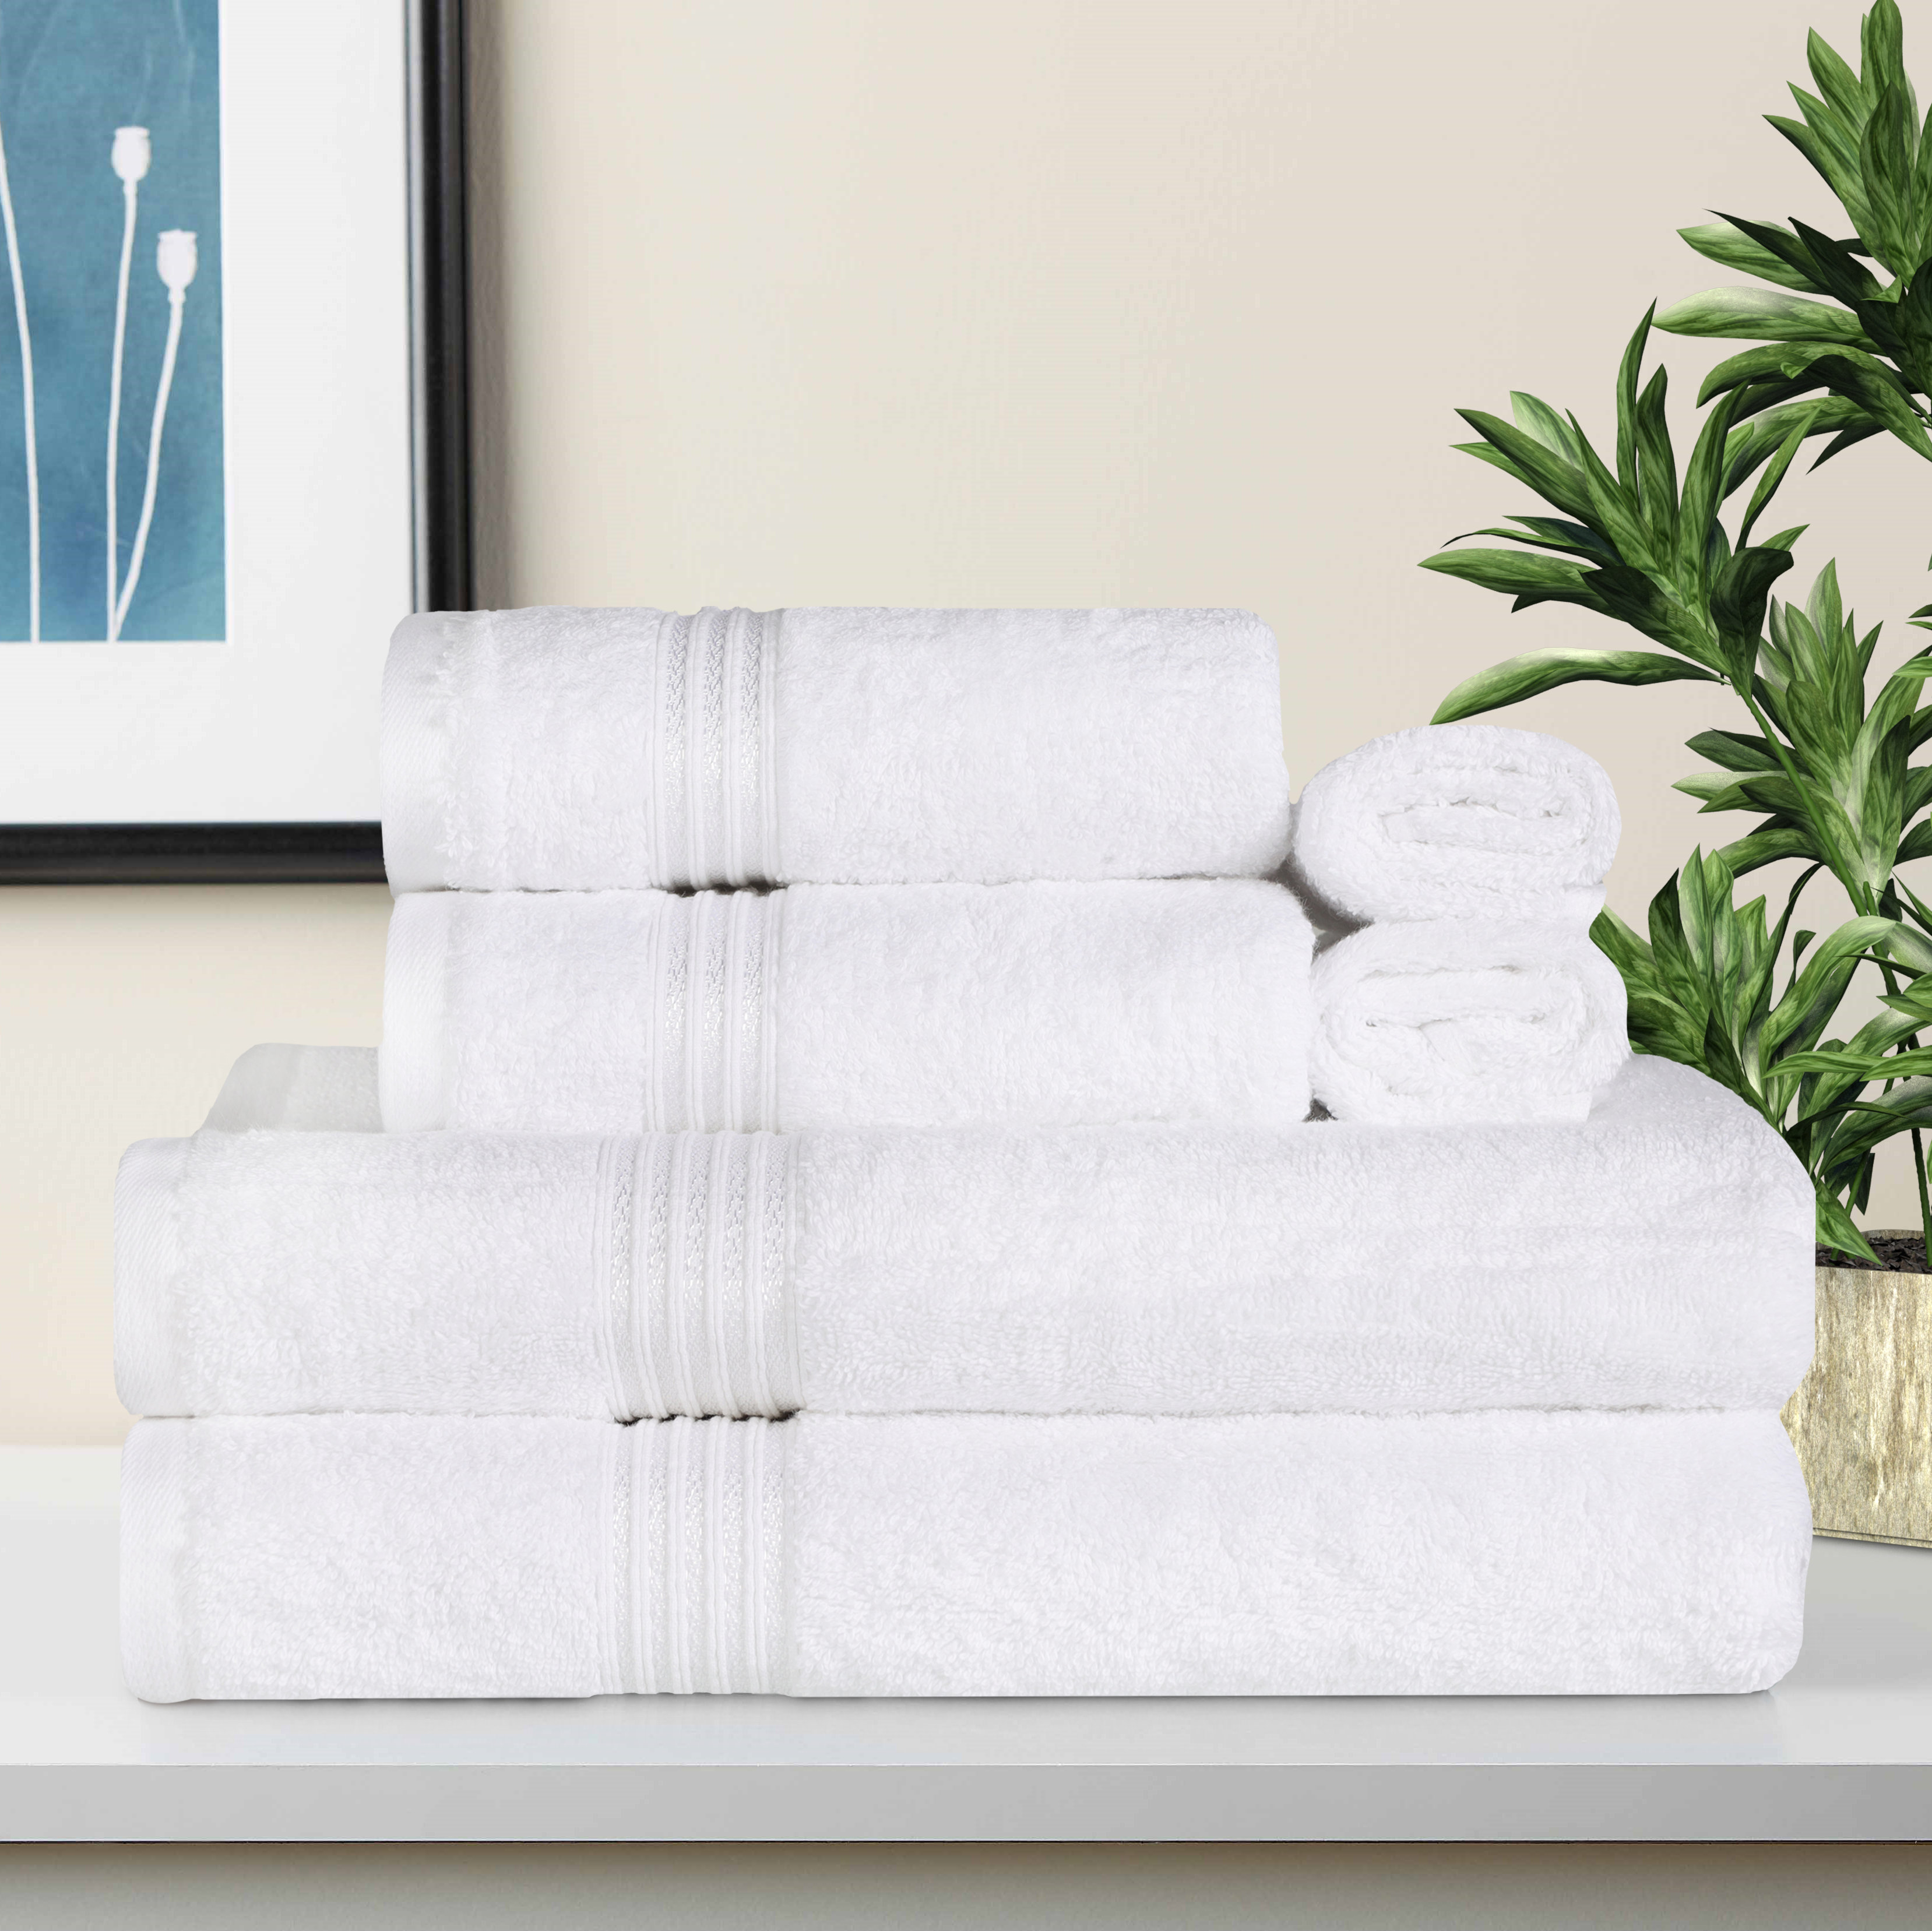 6PC ECONOMY SOFT TOWELS SET INCLUDE 2 BATH 2 HAND,2 FACE ASSORTED COLOURS FOR D 